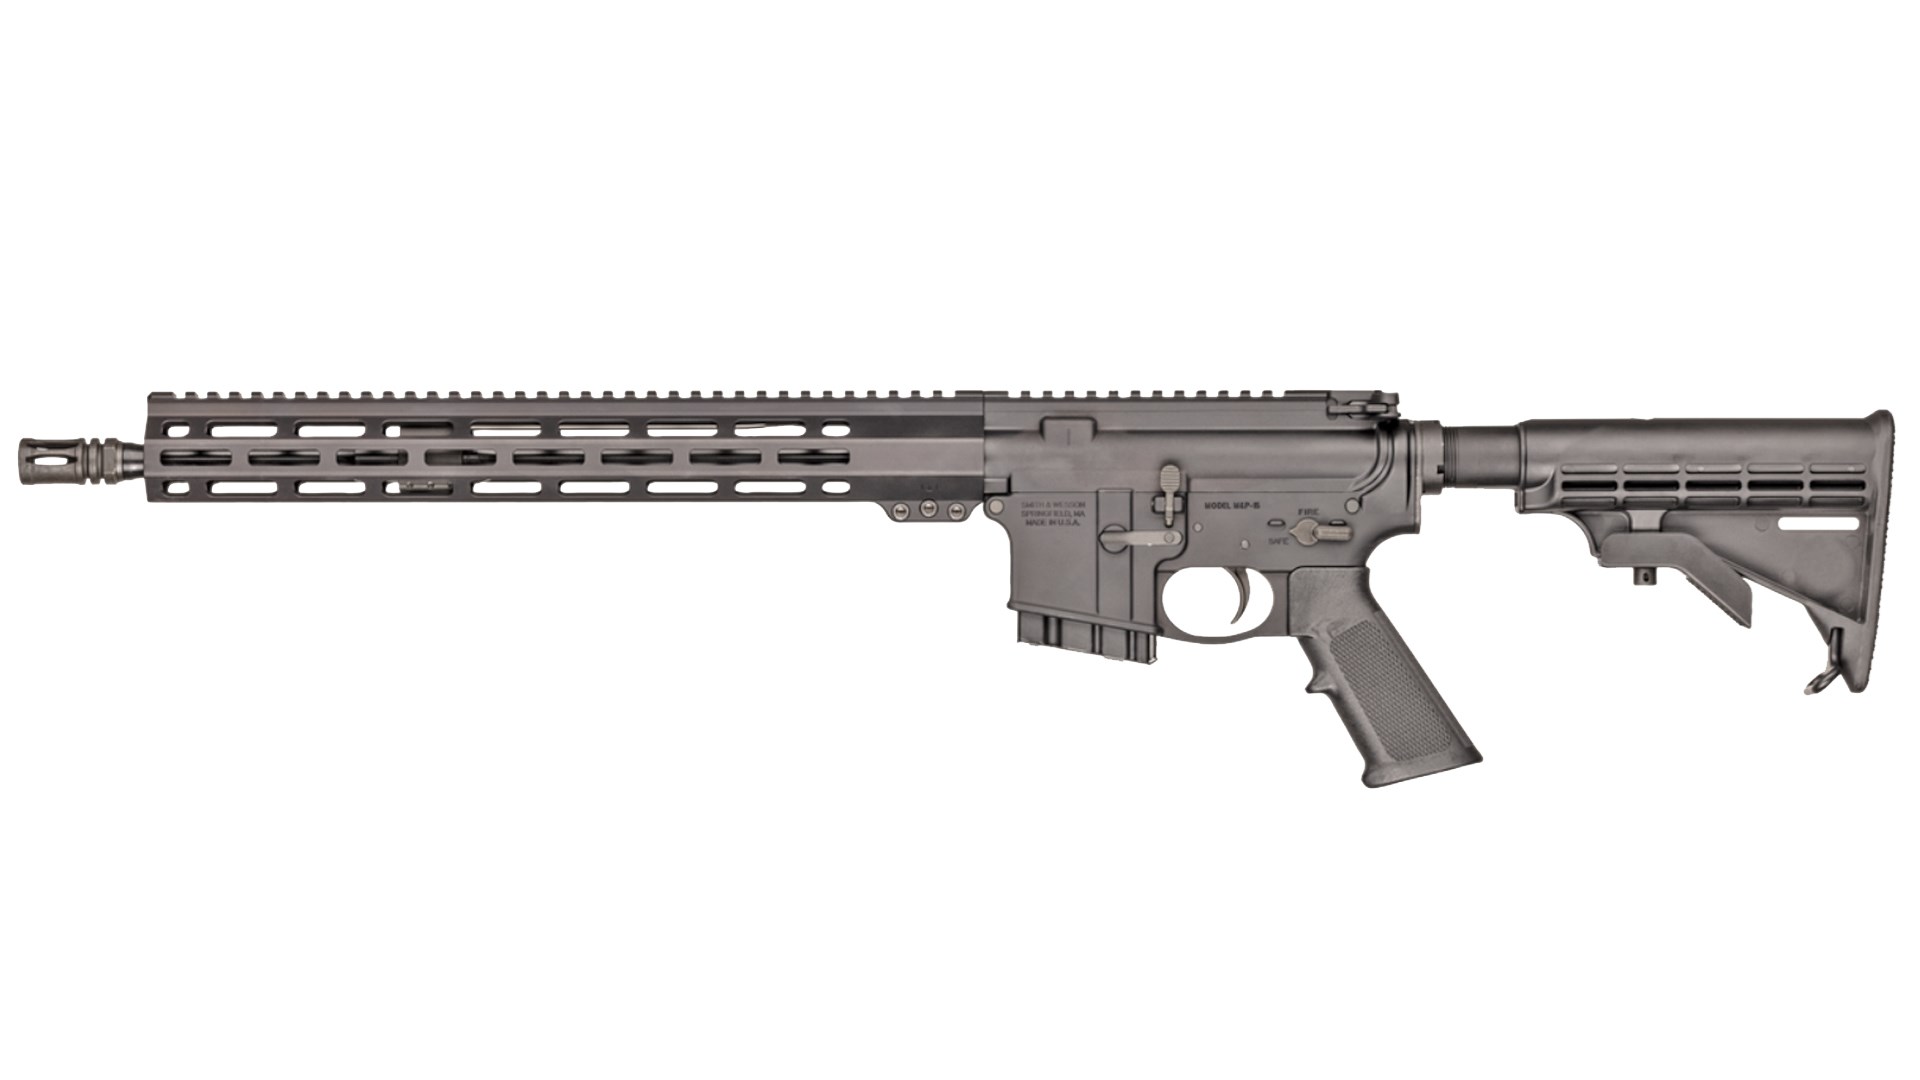 Left side of the Smith & Wesson M&P15 Sport III rifle.